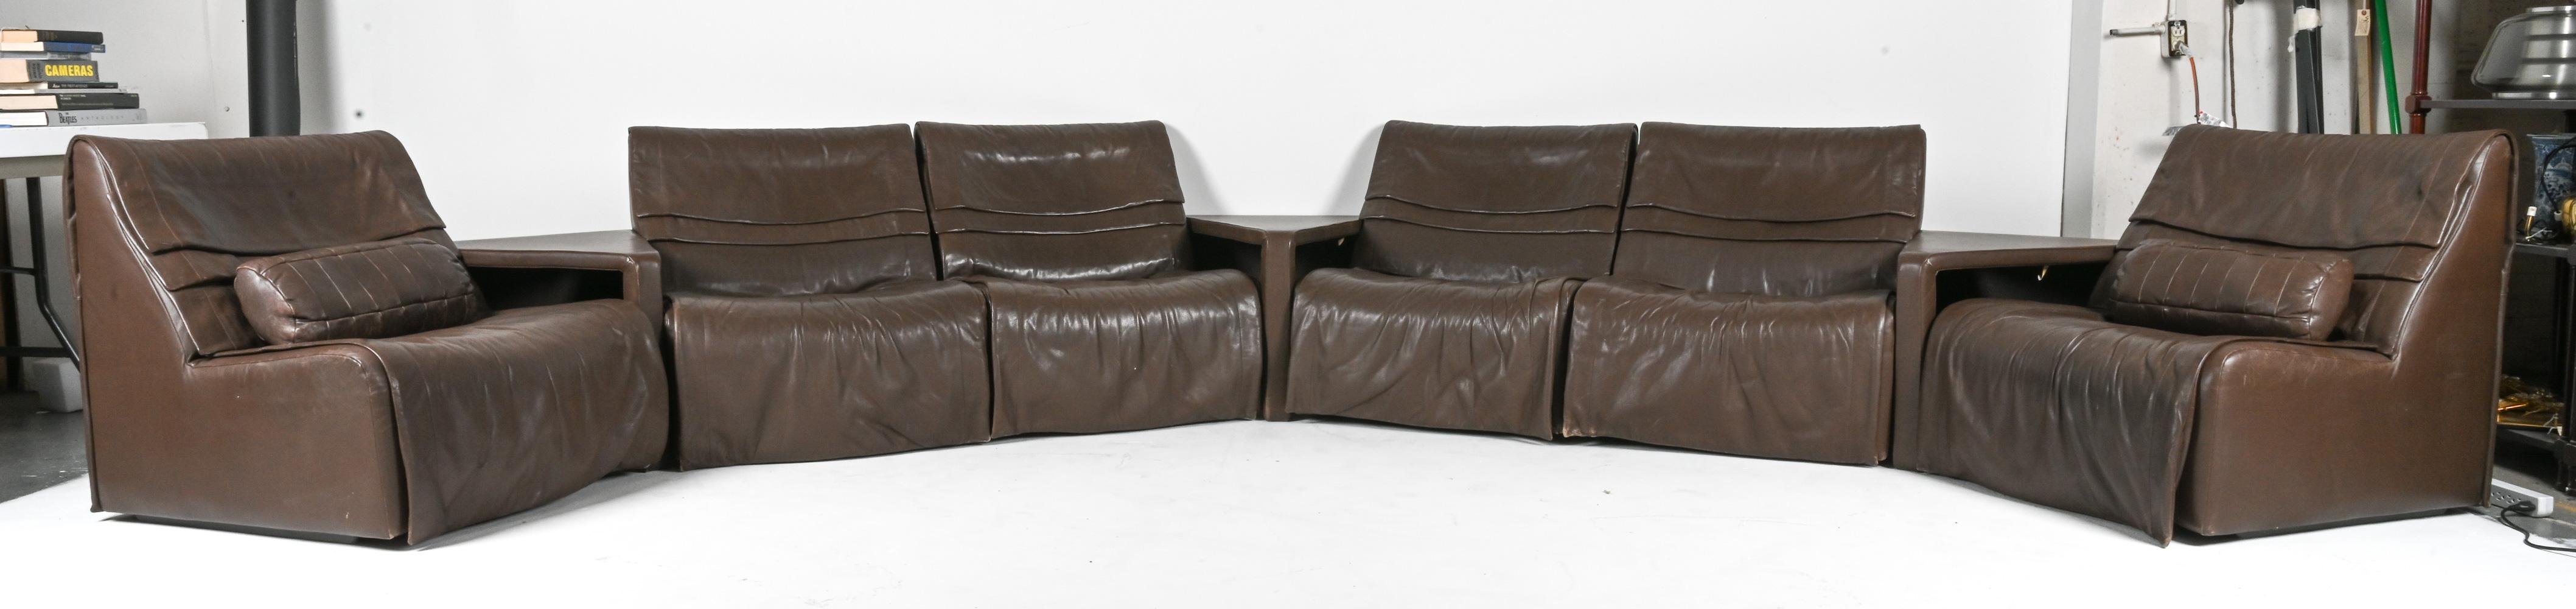 De Sede DS 500 Modular Sectional Sofa & Table Suite in Brown Leather In Good Condition For Sale In Norwalk, CT